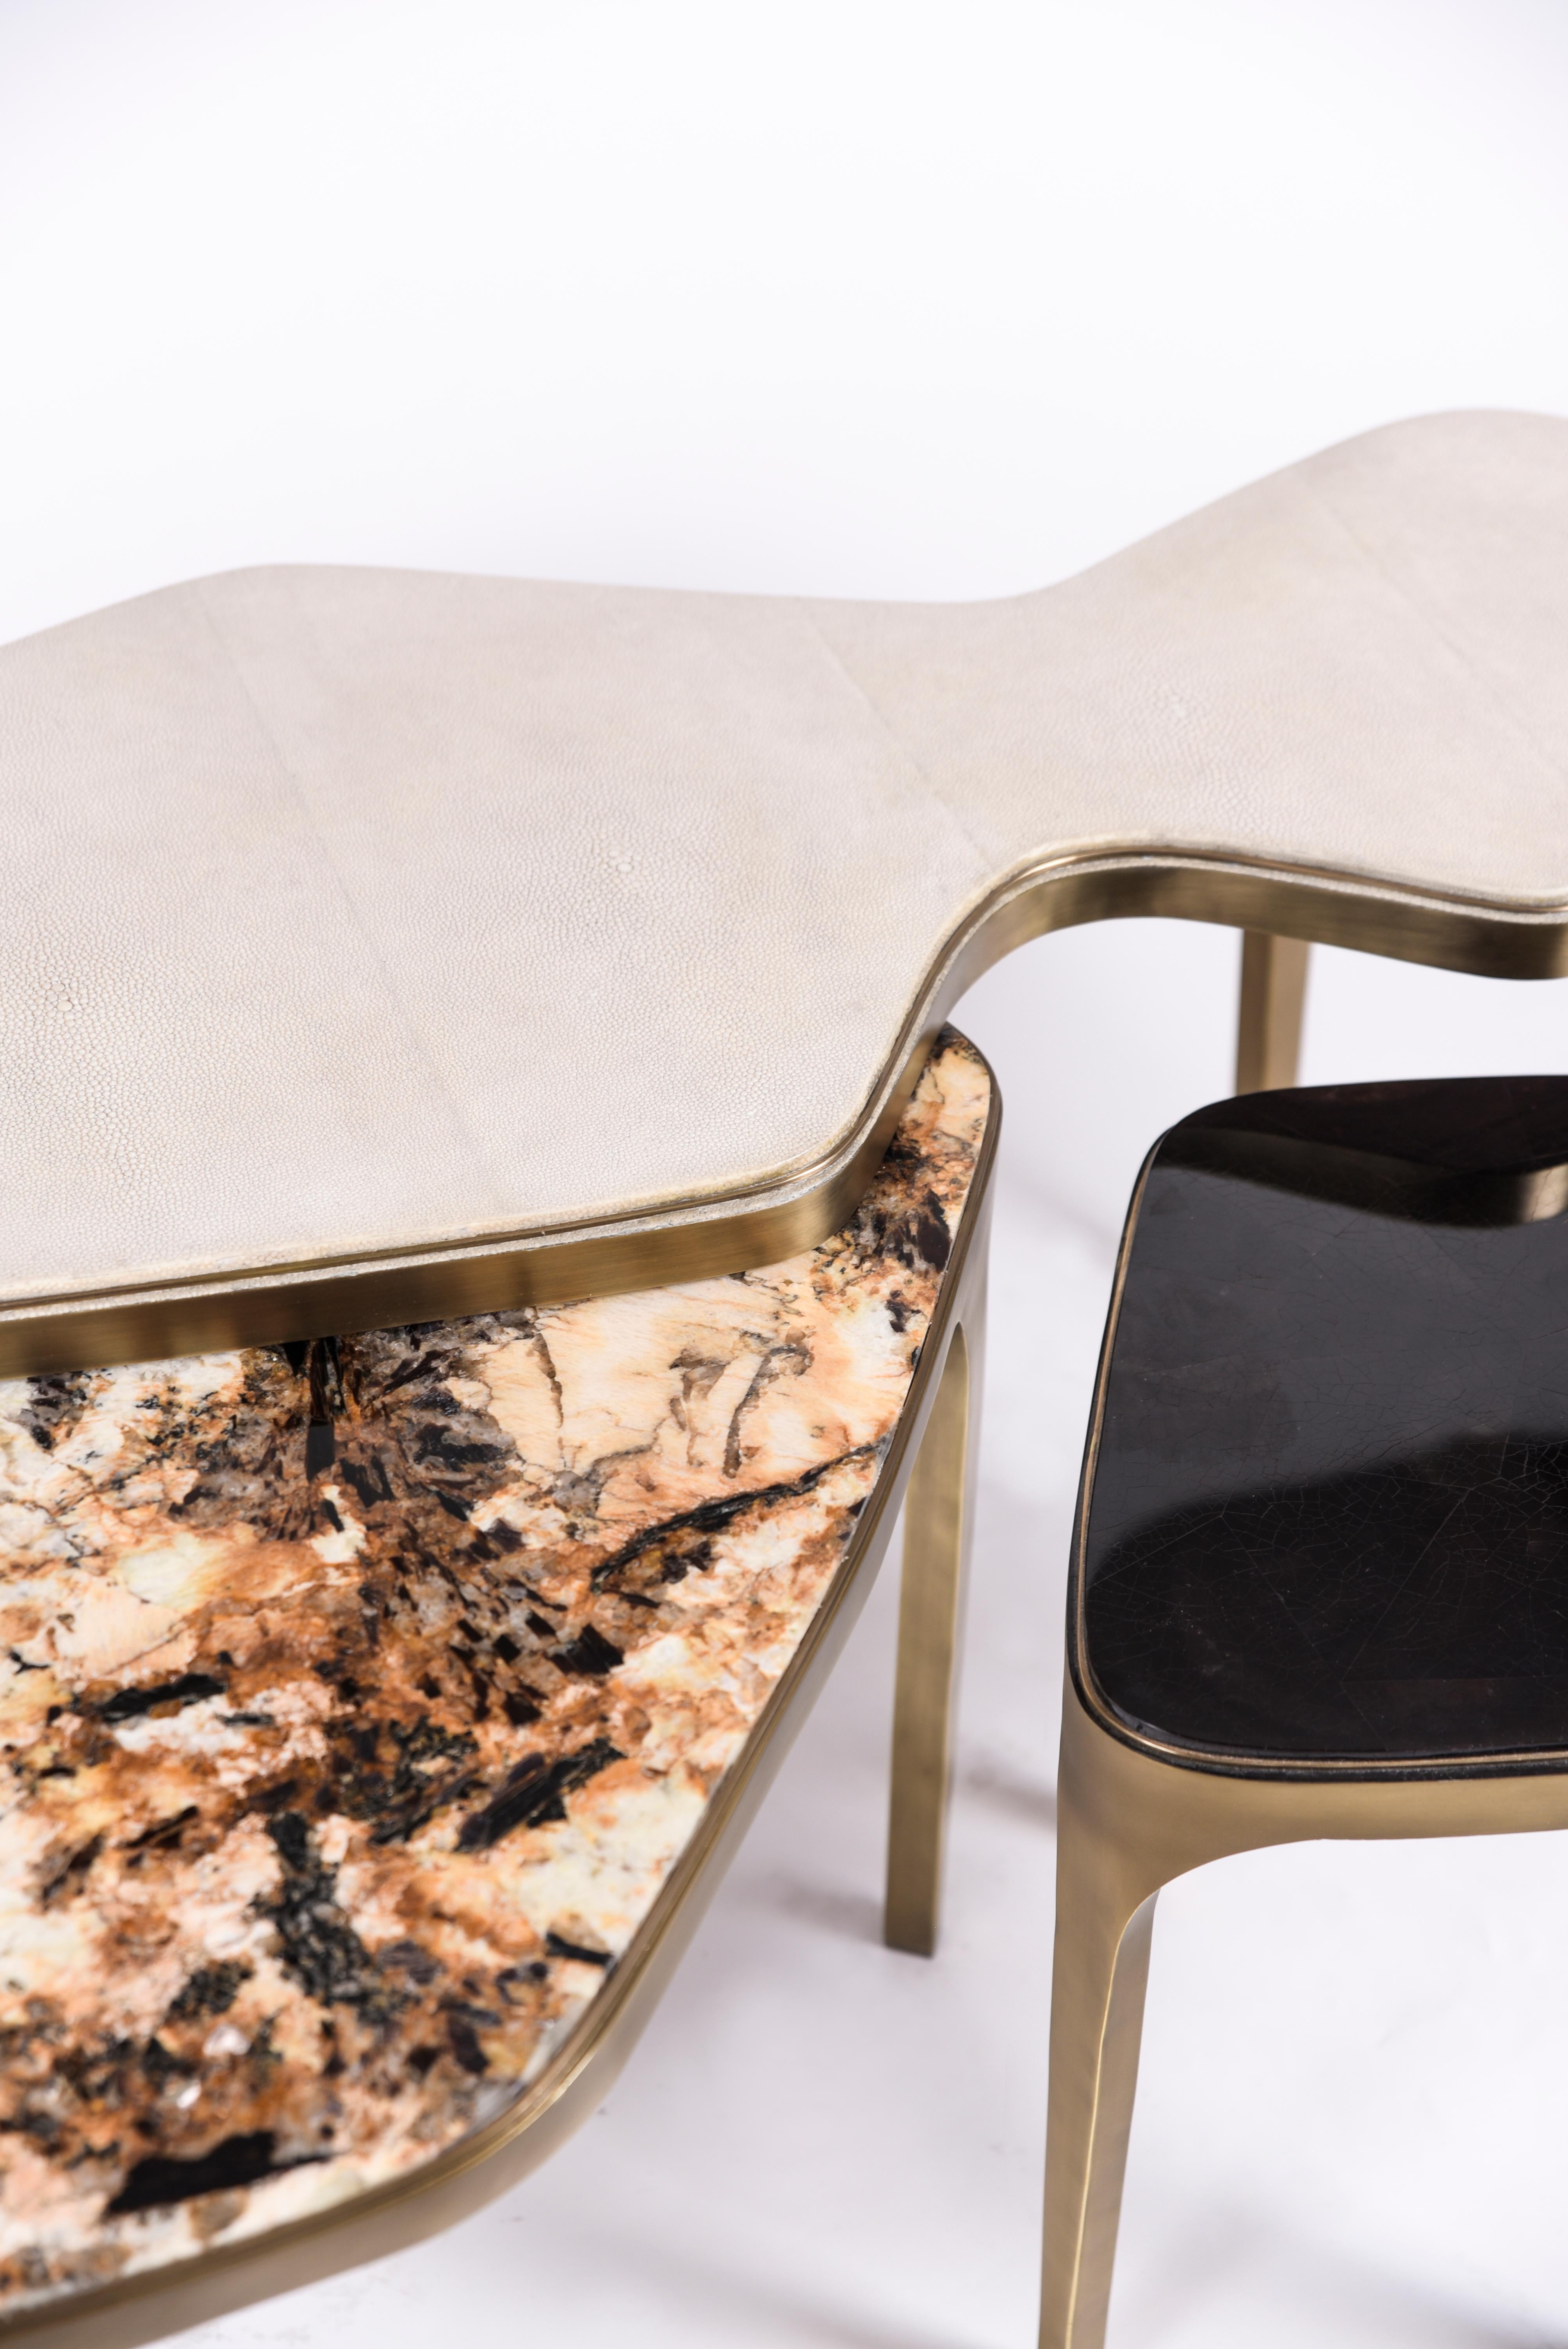 The cosmos nesting coffee tables are both Minimalist and dramatic. The top is inlaid in cream shagreen in the large size, Hwana Stone in the medium size and black pen shell in the small size, that is hand-dyed by artisans, and completed with